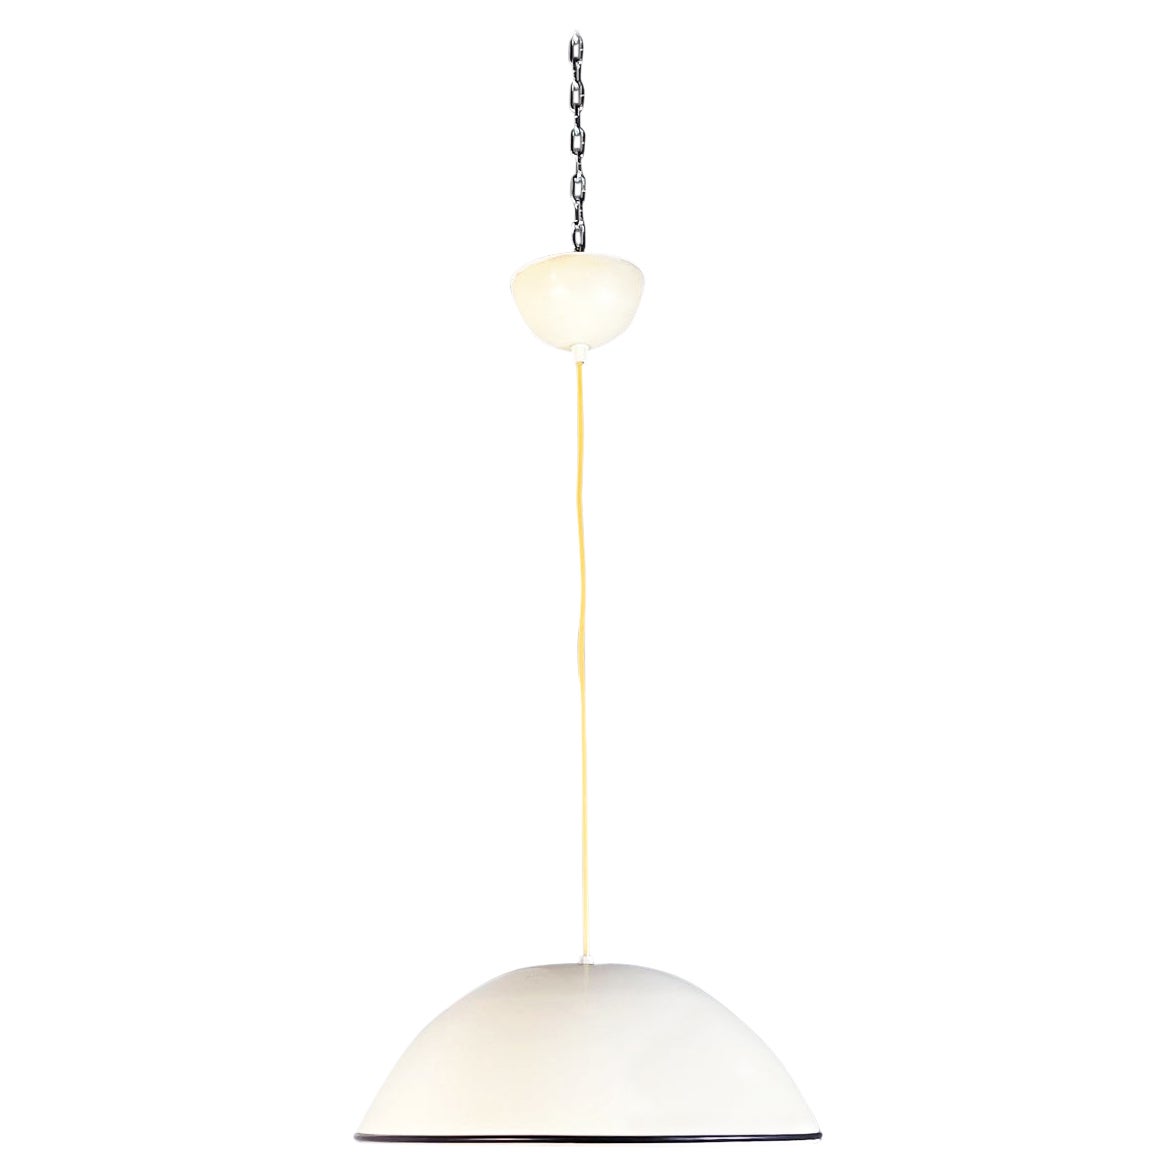 Italian Mid-Century Metal Suspension Lamp Relemme by Castiglioni for Flos, 1970s